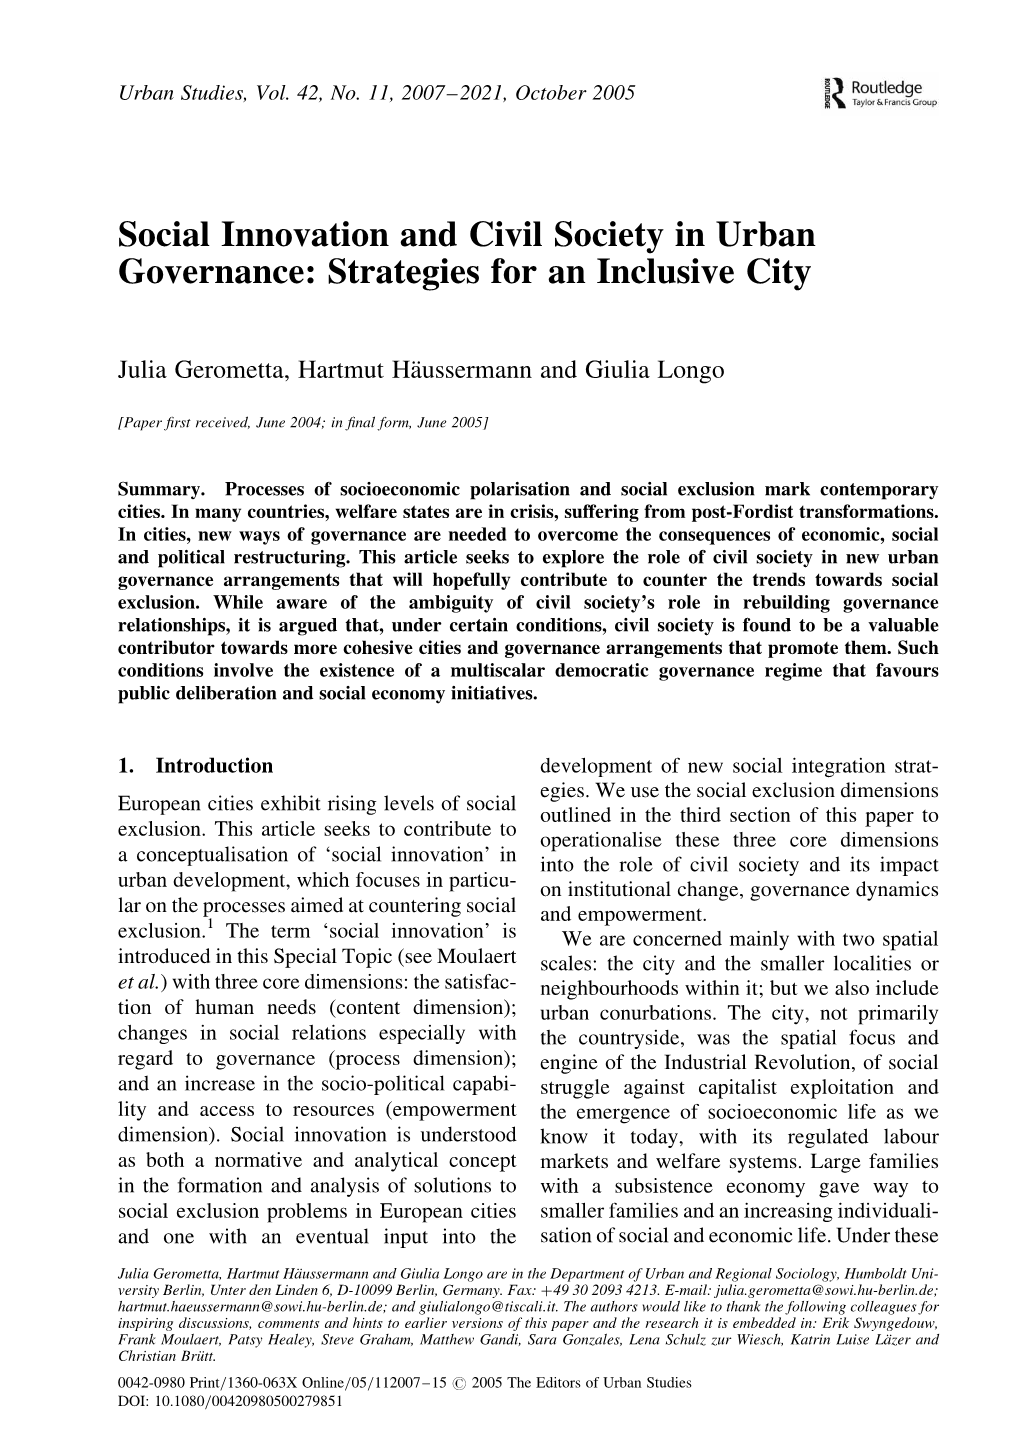 Social Innovation and Civil Society in Urban Governance: Strategies for an Inclusive City